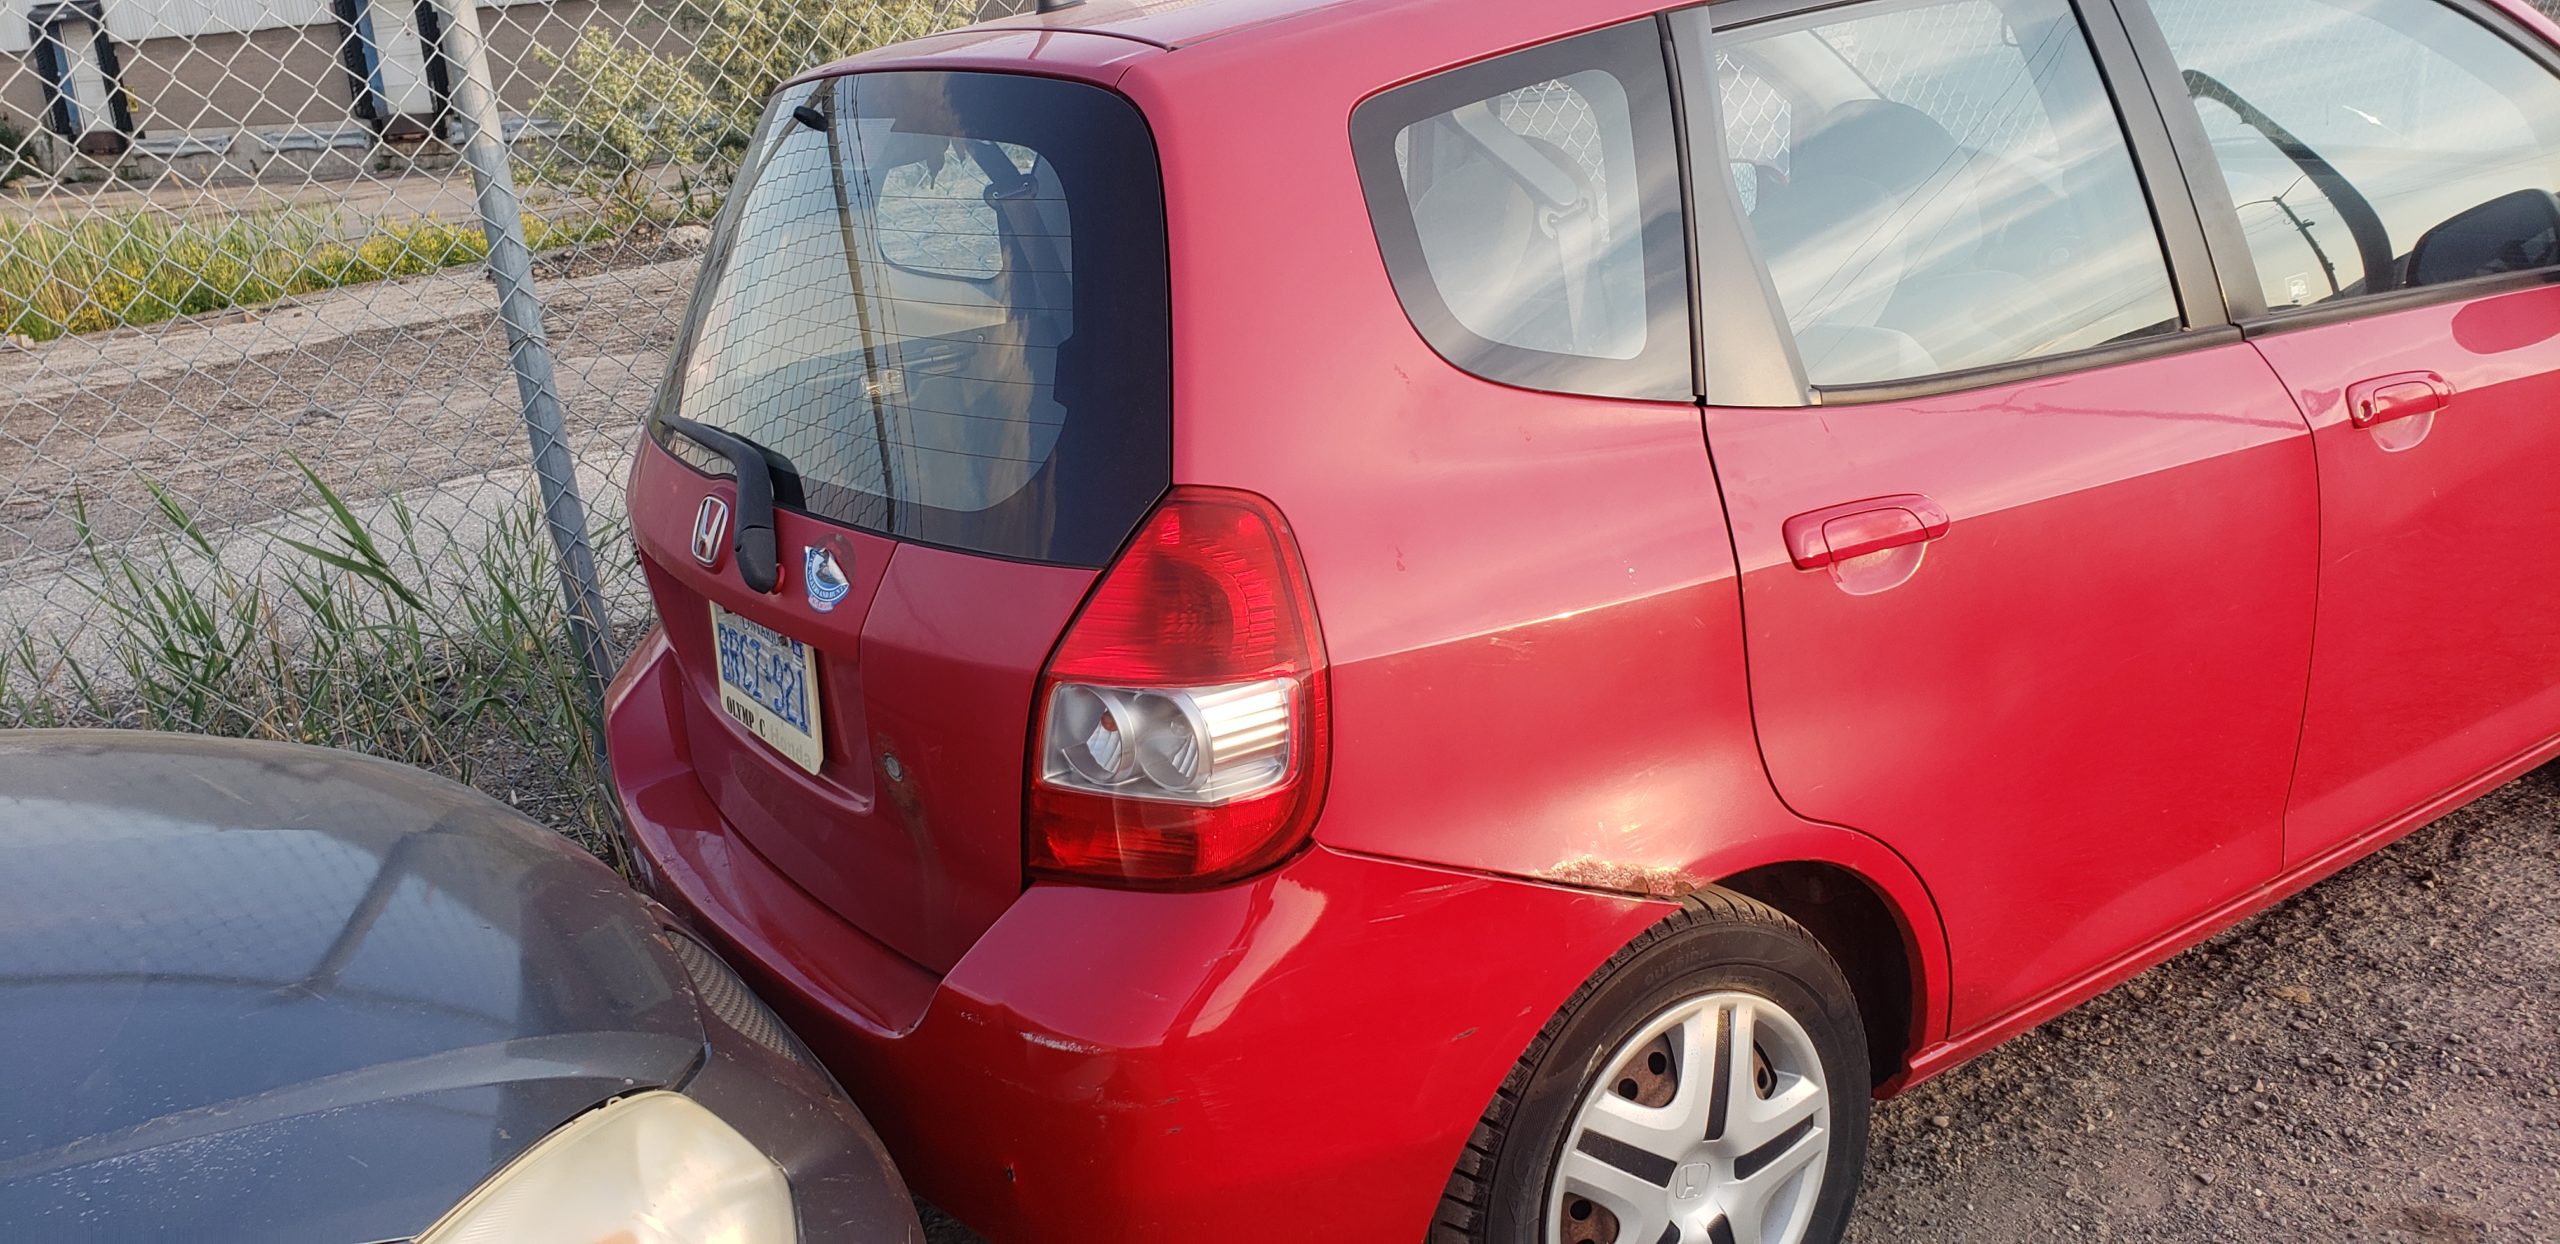 Auto Recycling Honda Fit 2009 - Cash For Cars in Nobelton and North York